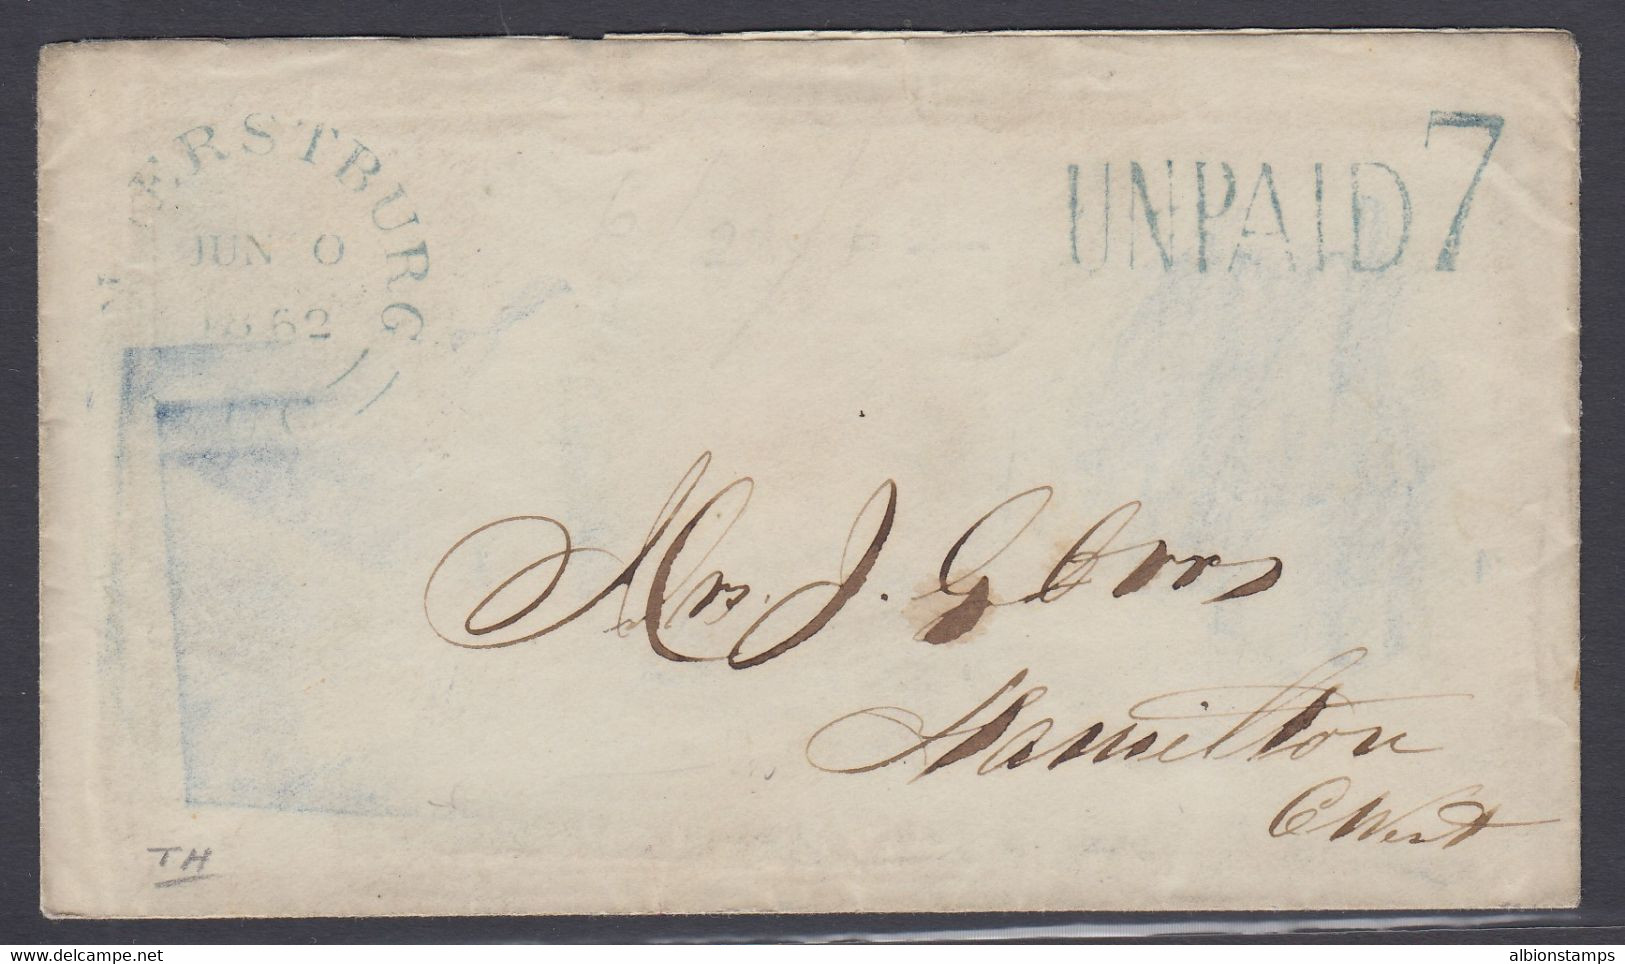 Canada 1852 Stampless cover, Amherstburg "Unpaid 7" to Hamilton